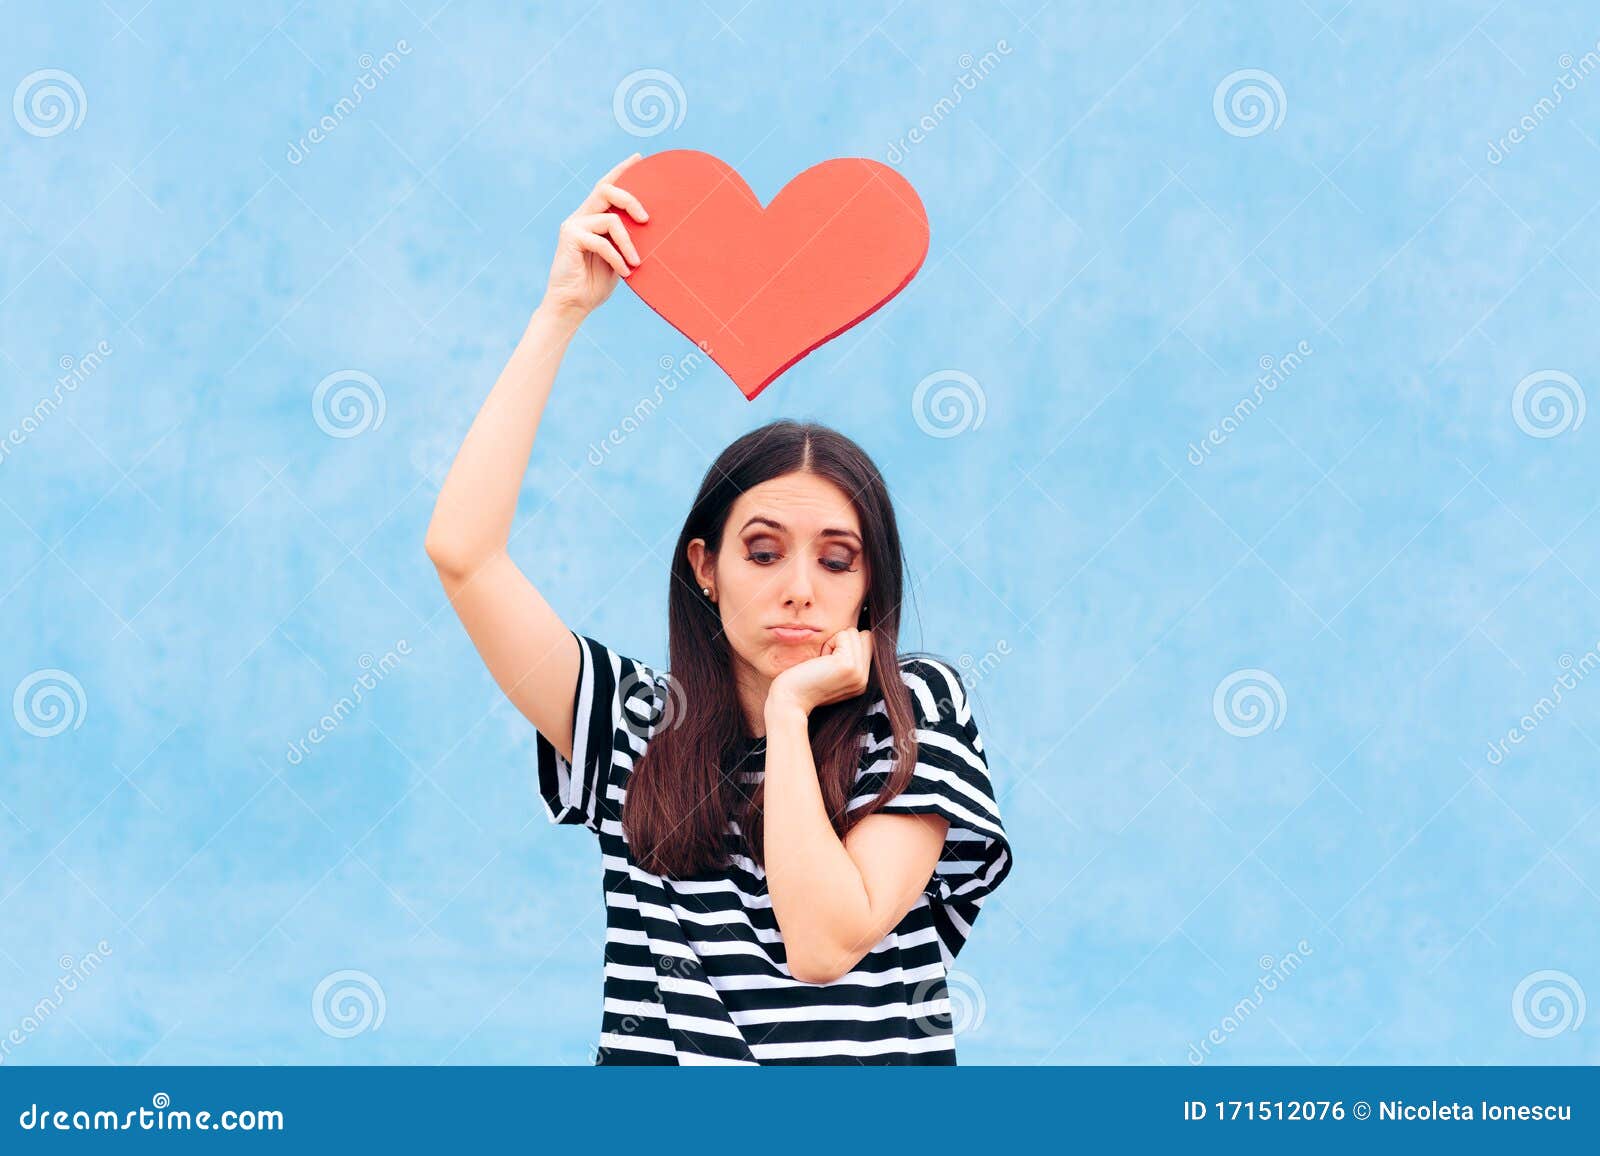 Sad Girl in Love Holding Big Red Heart Stock Photo - Image of ...